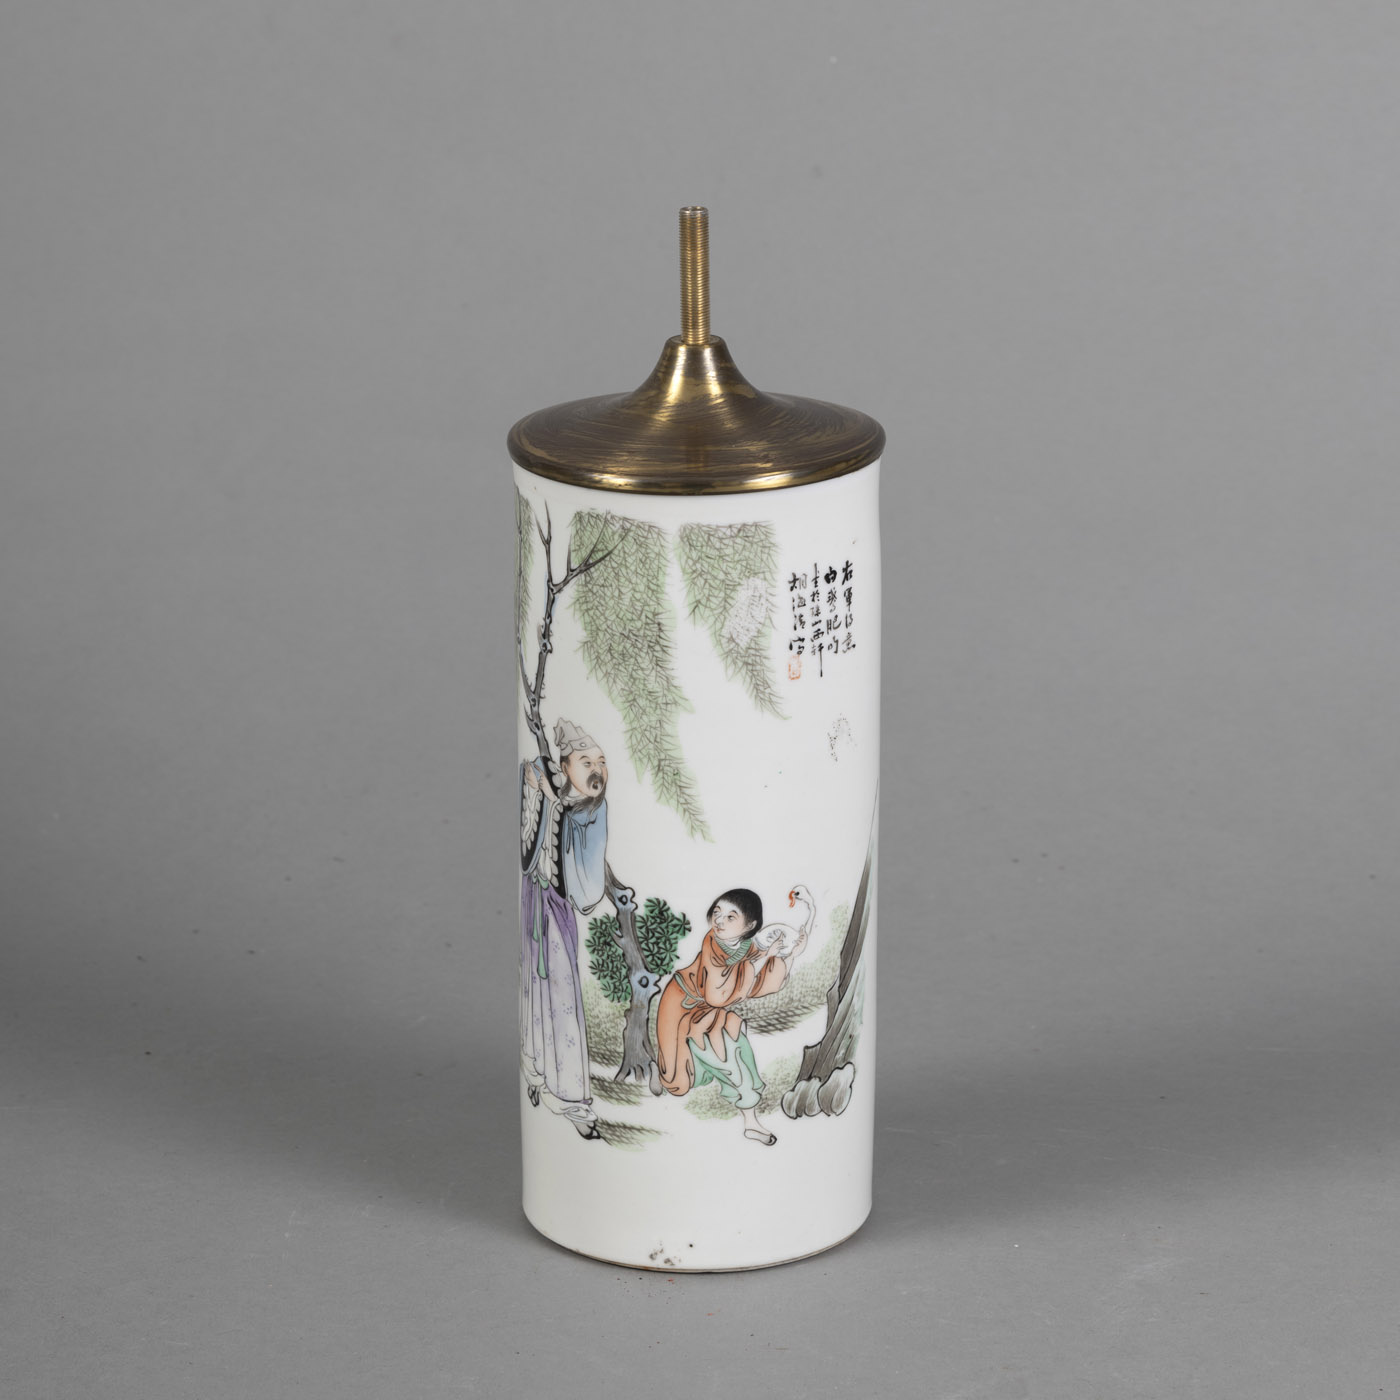 <b>A CYLINDRICAL POLYCHROME PAINTED PORCELAIN HAT STAND DEPICTING 'WANG XIZHI AND HIS GOOSE'</b>